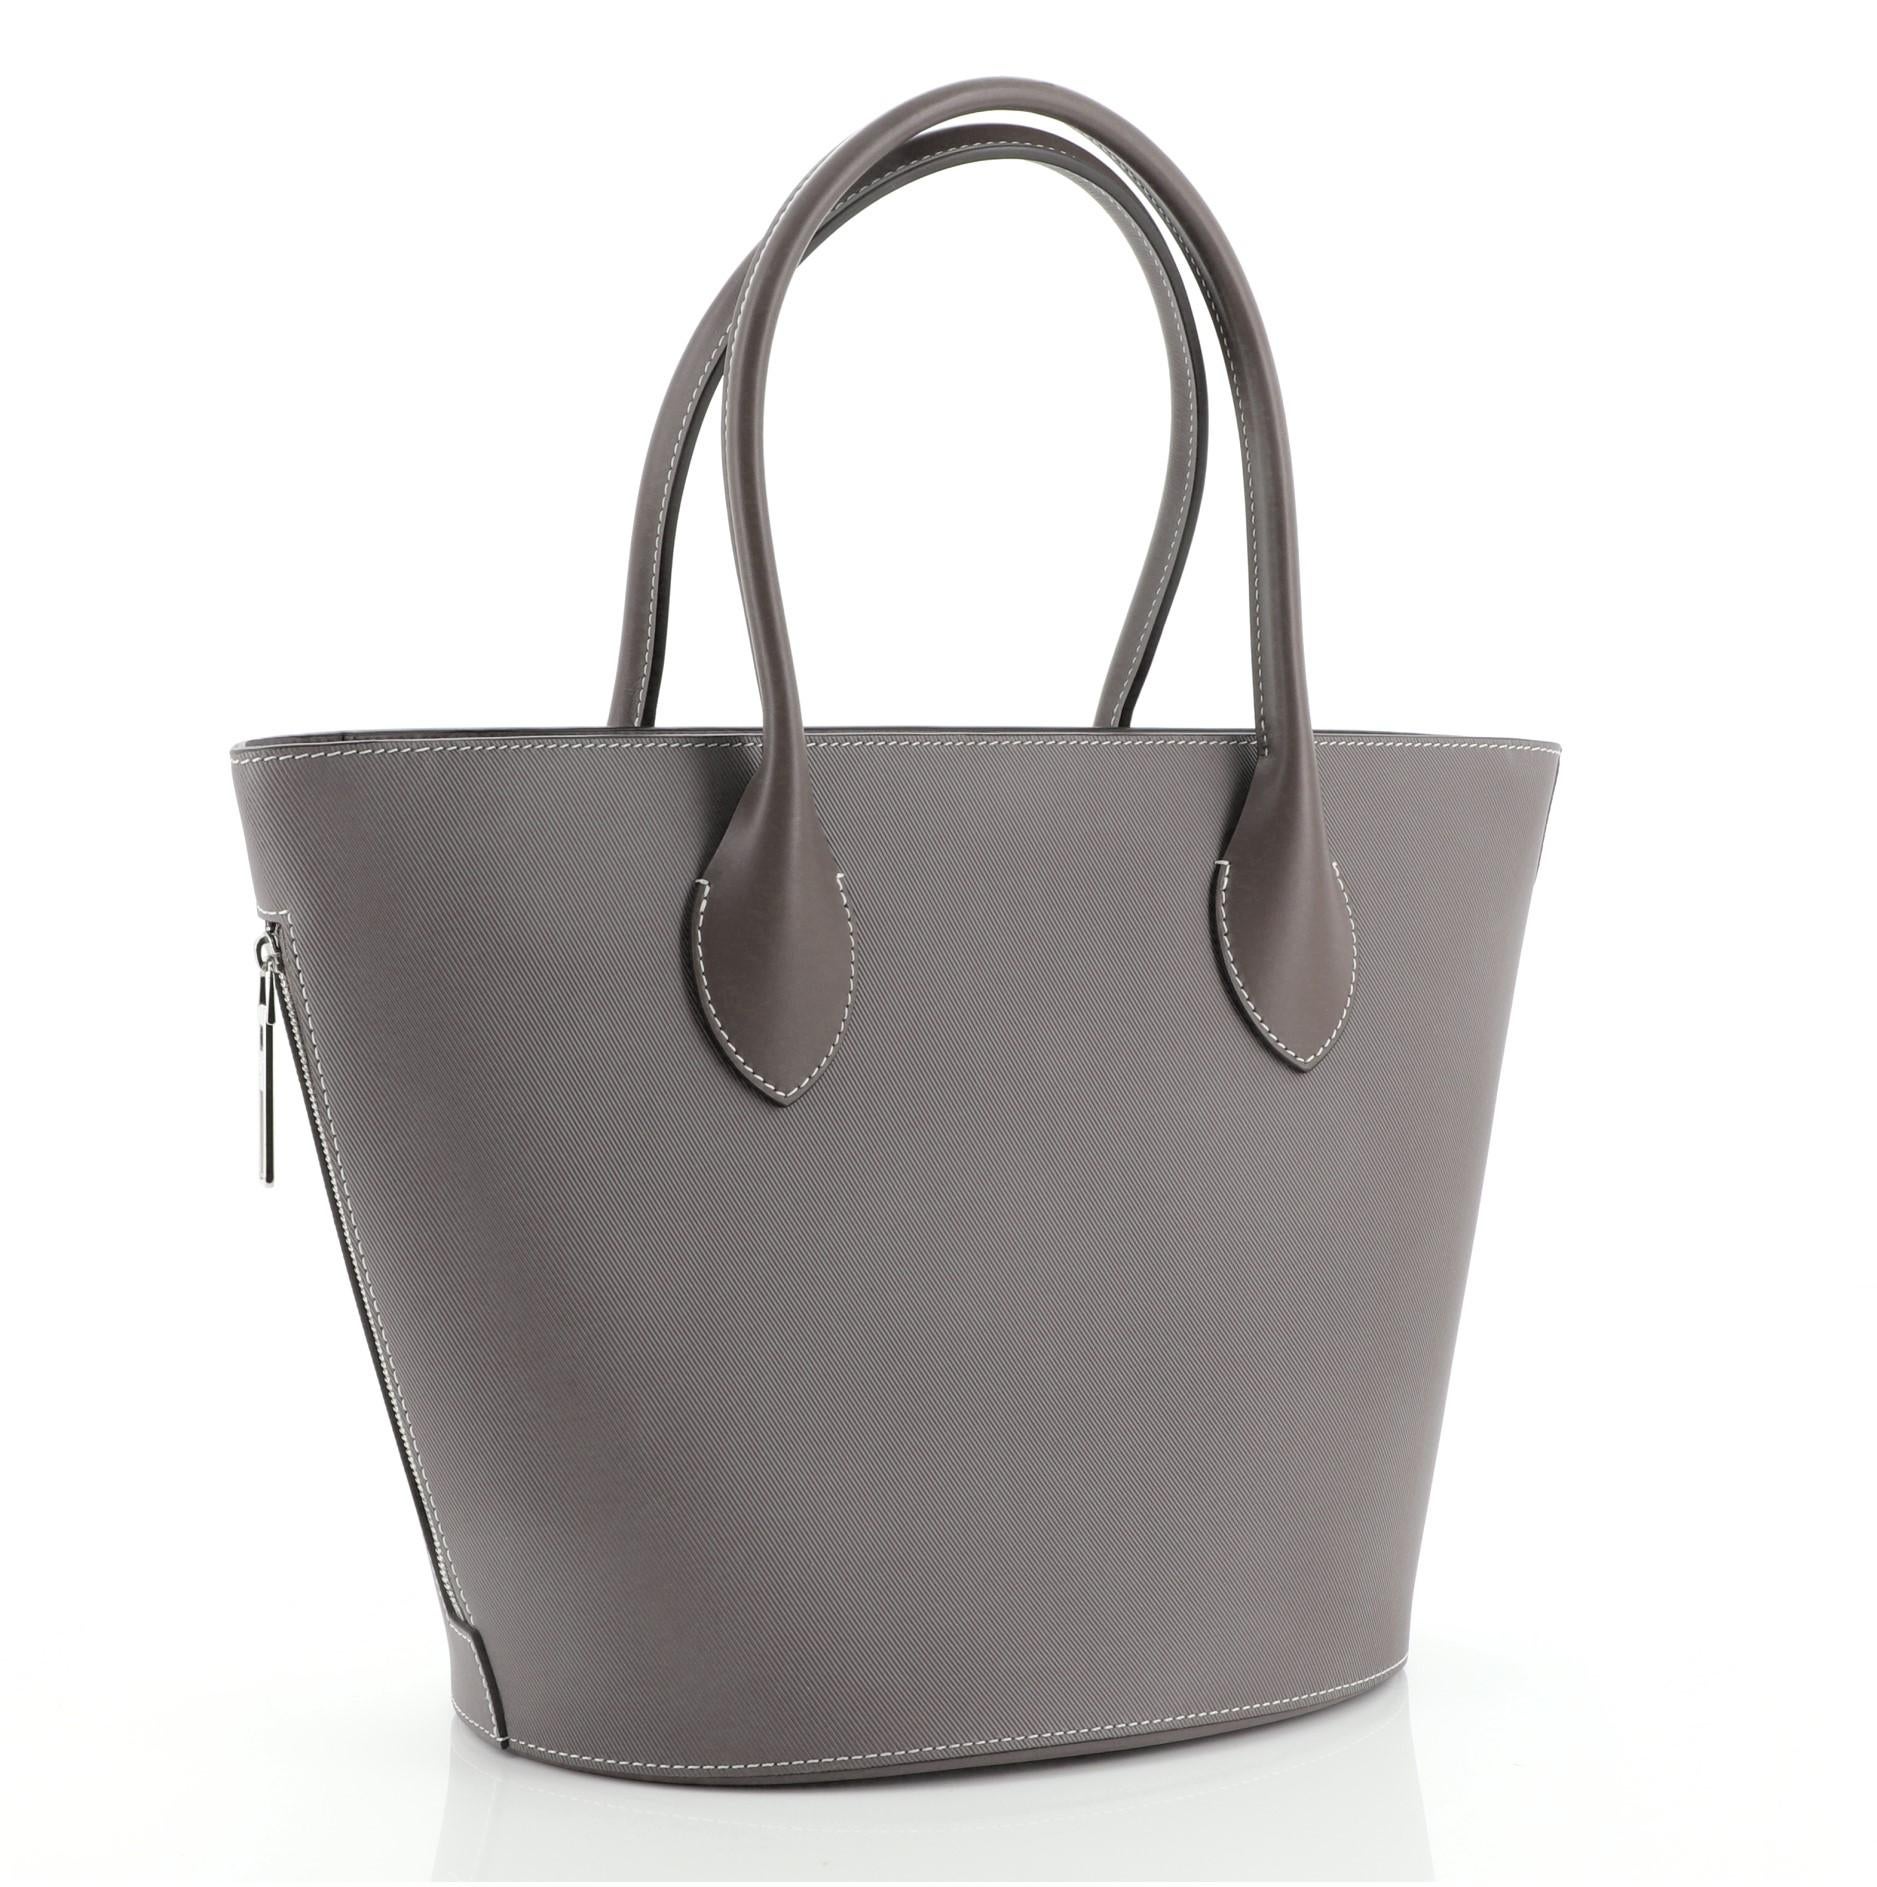 Louis Vuitton Holdall Tote Veau Satin Leather PM
Gray Satin Leather

Condition Details: Minor scuffs on exterior and handles, wear in interior, scratches on hardware.

44948MSC

Height 10